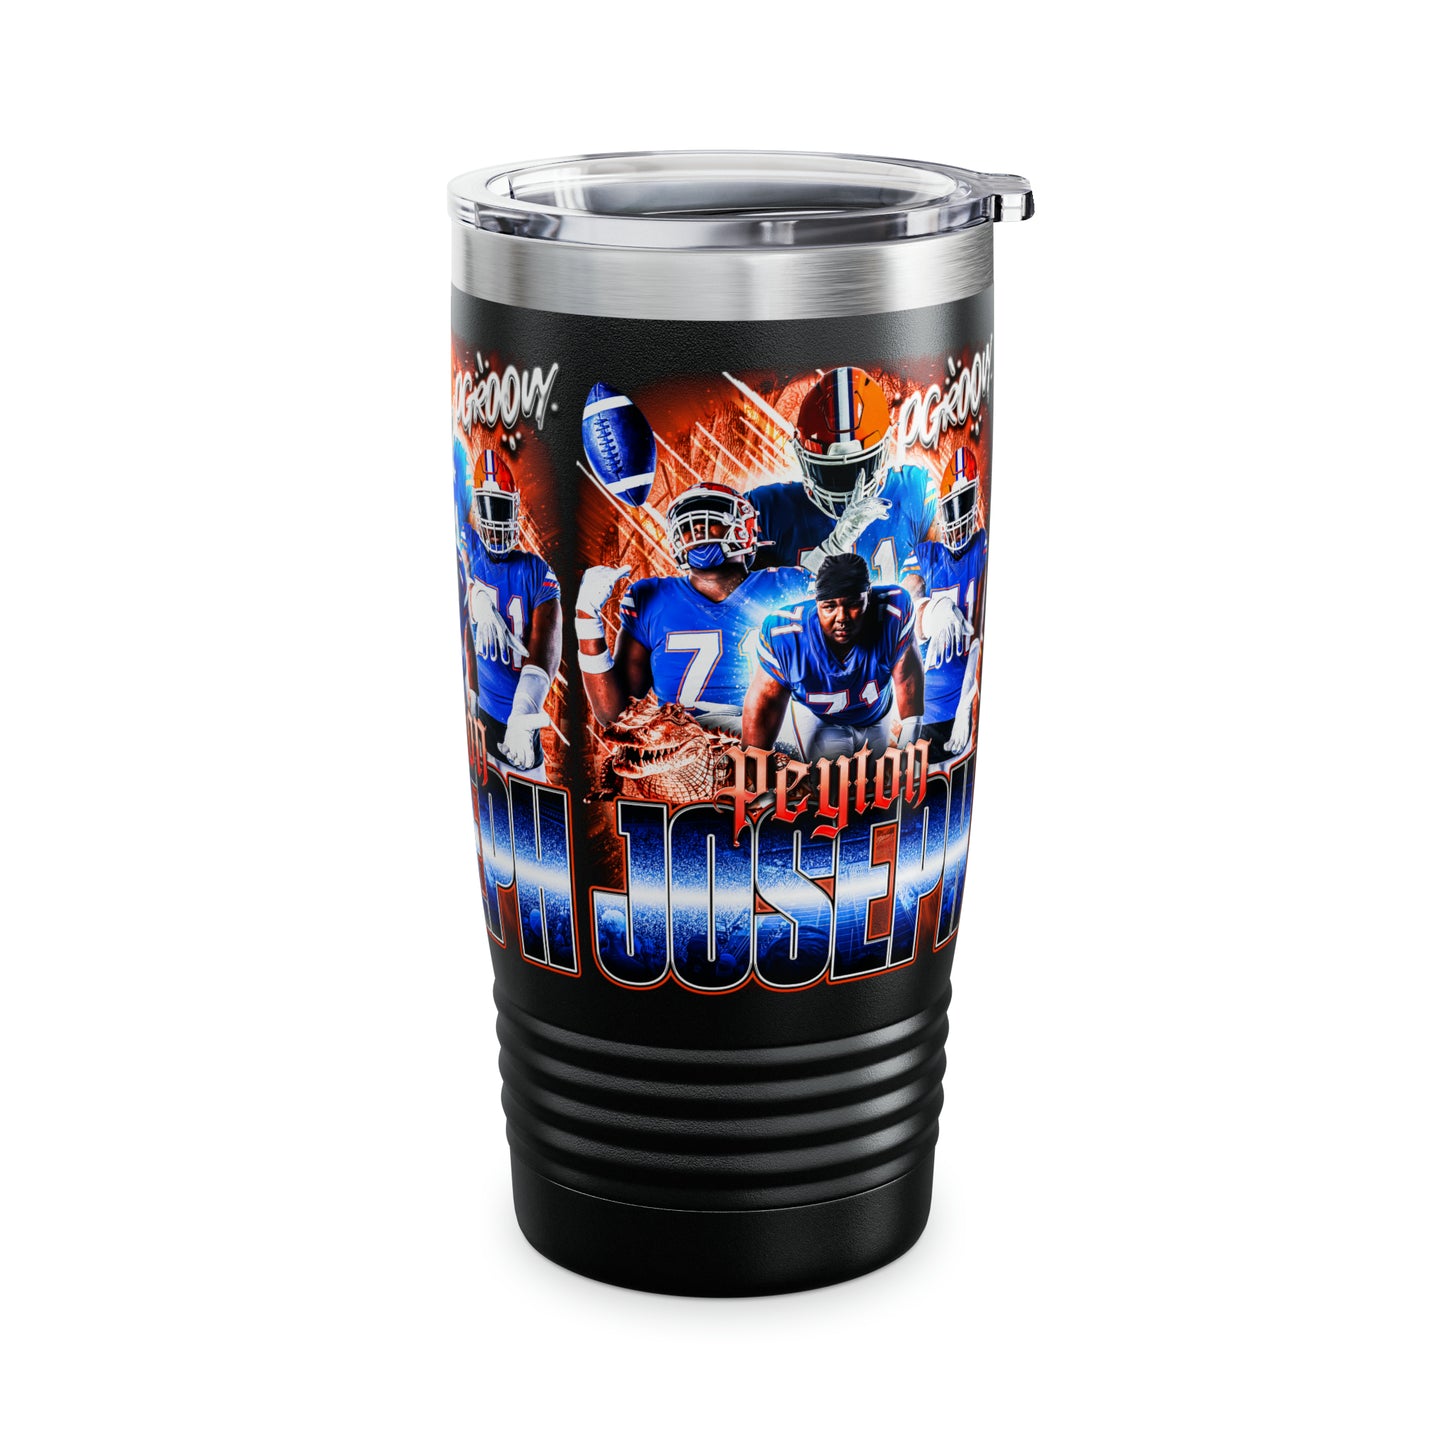 PGROOVY STAINLESS STEEL TUMBLER